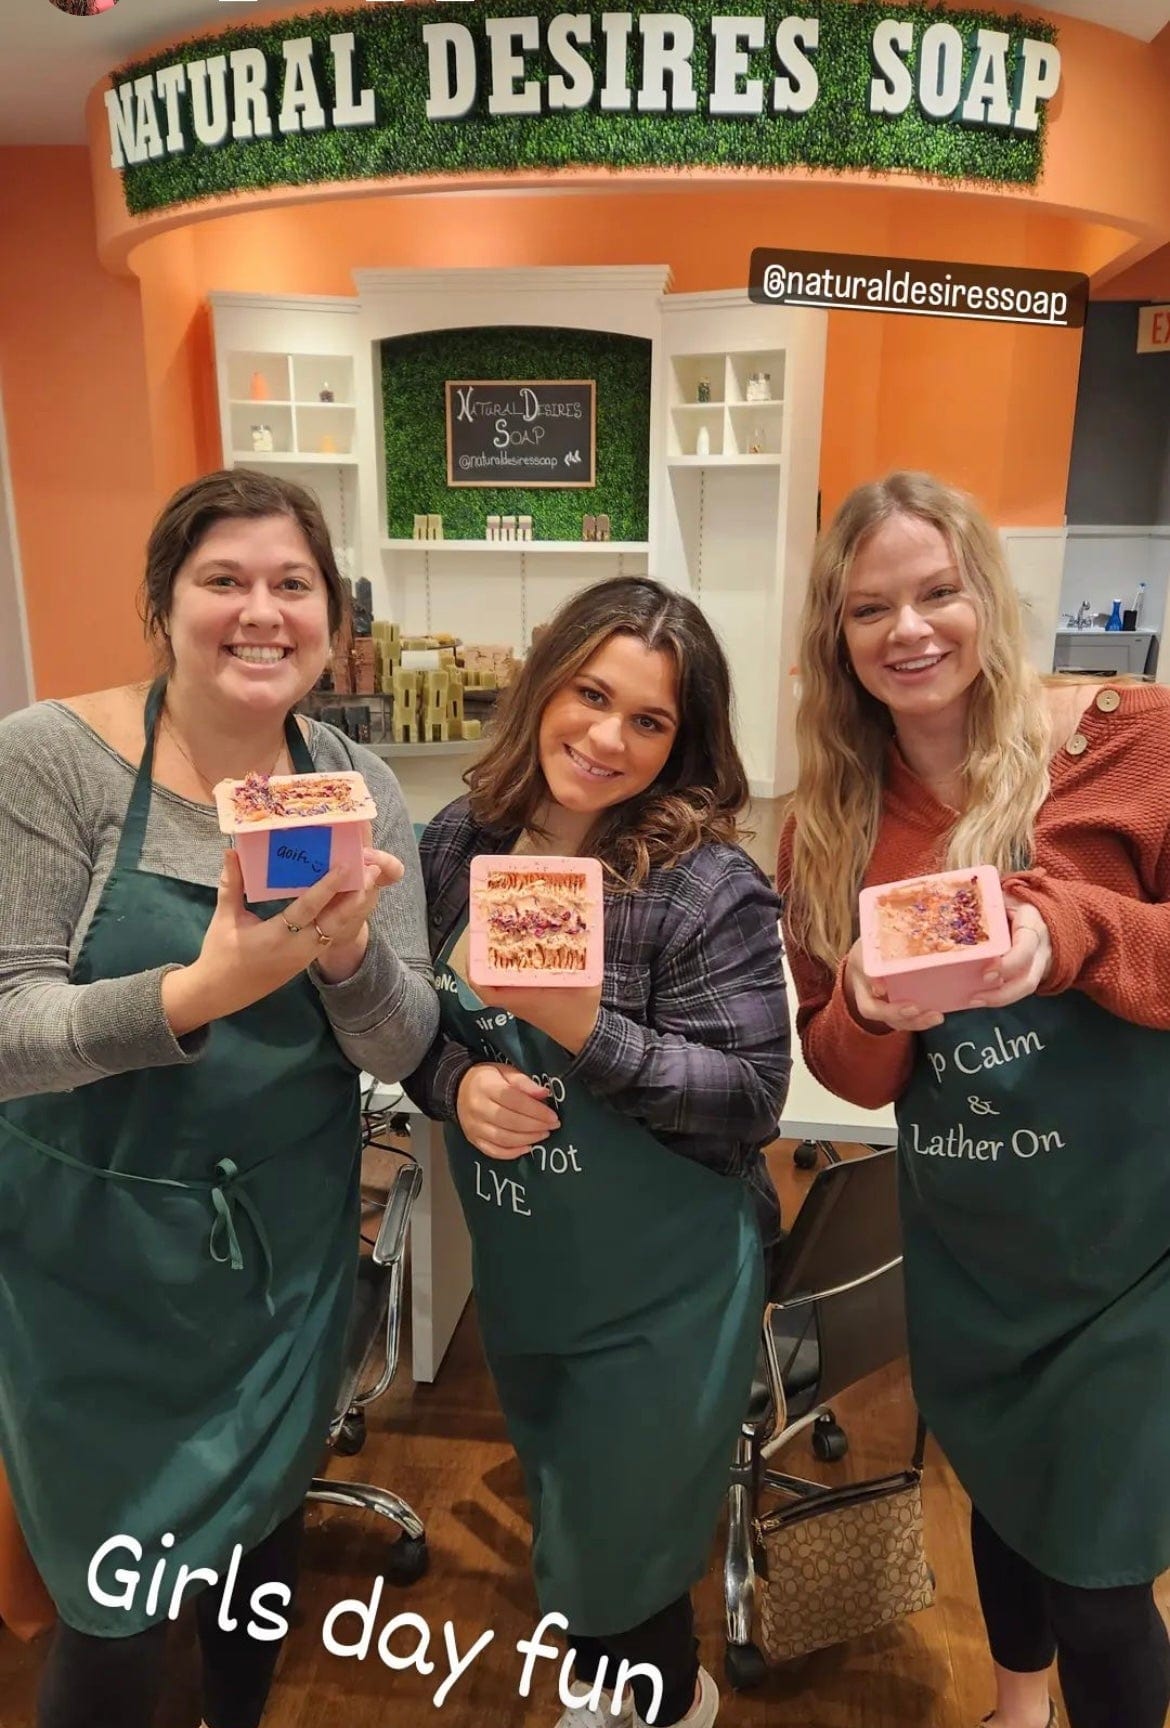 Soap Making Class May 4th 2:00 pm